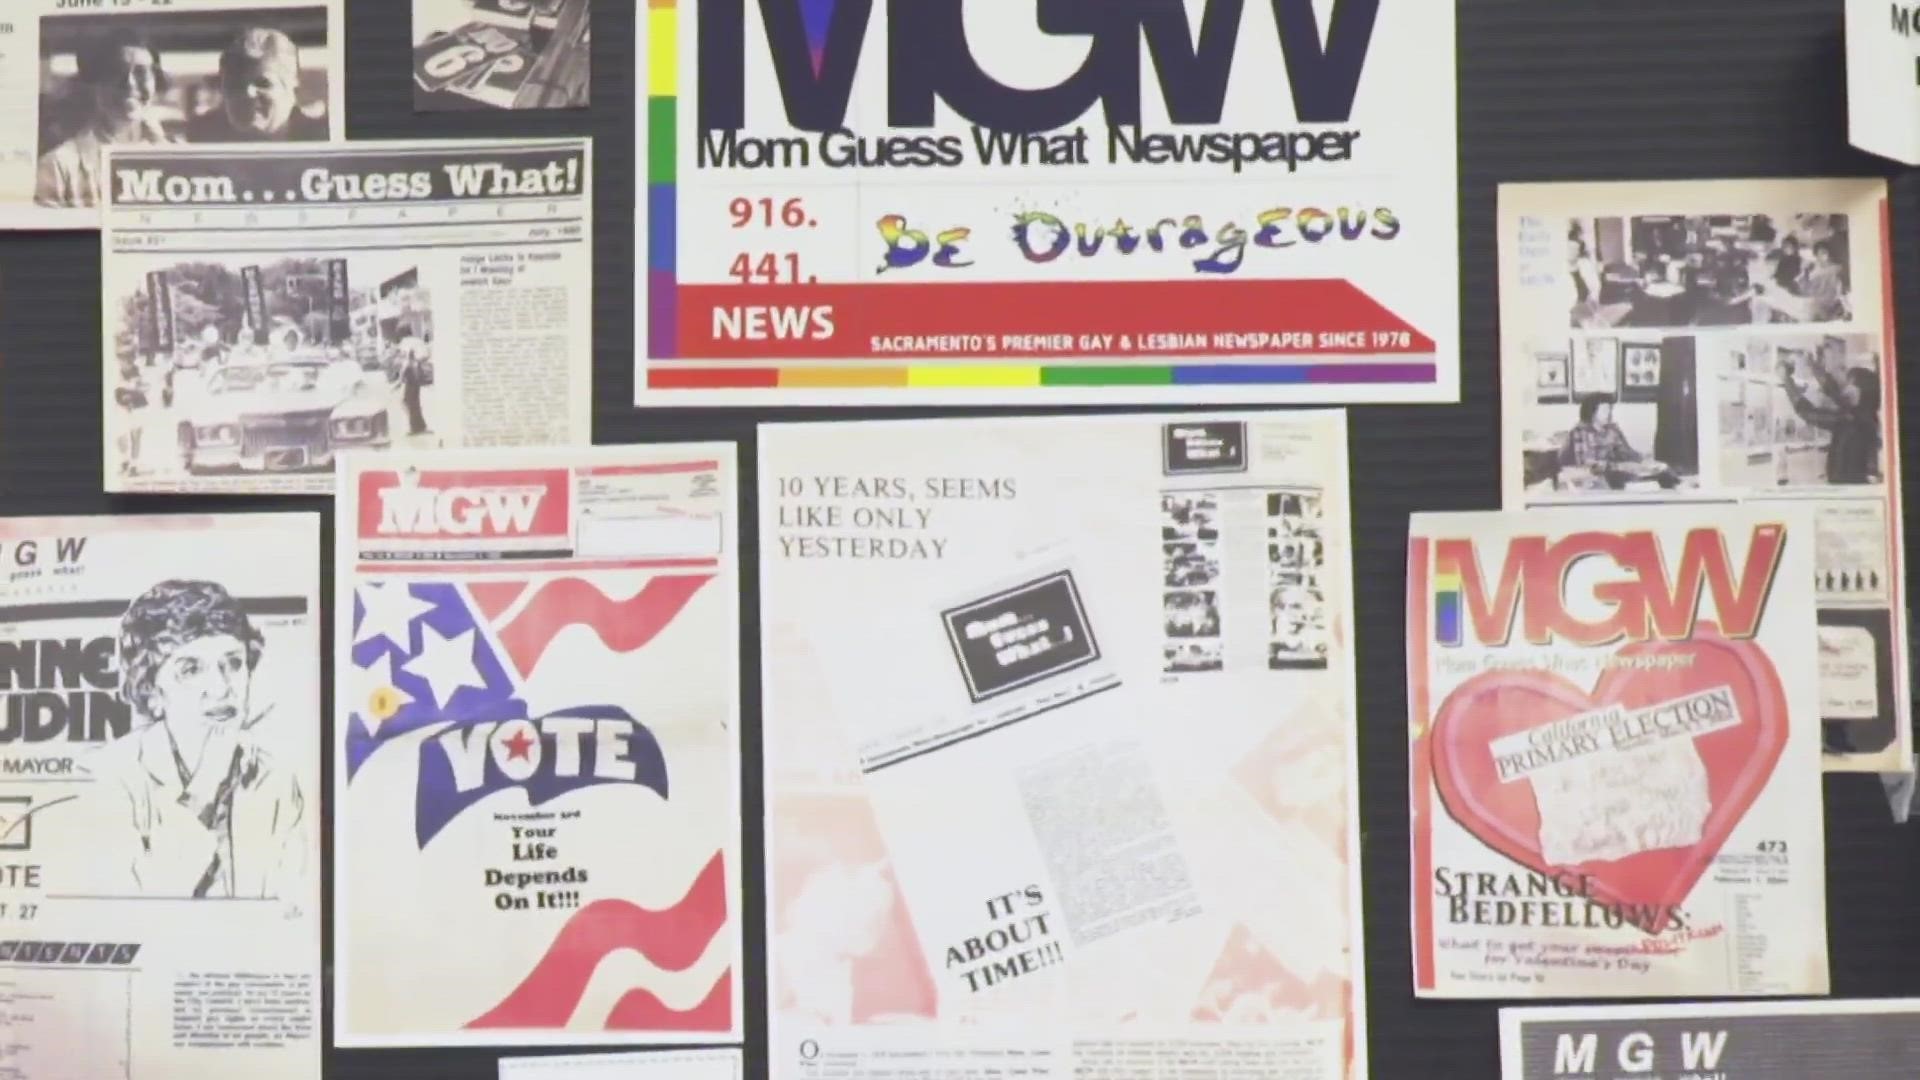 The Center for Sacramento History is looking for original copies or Sacramento's first LGBT newspaper, "Mom Guess What" created by Linda Birner.